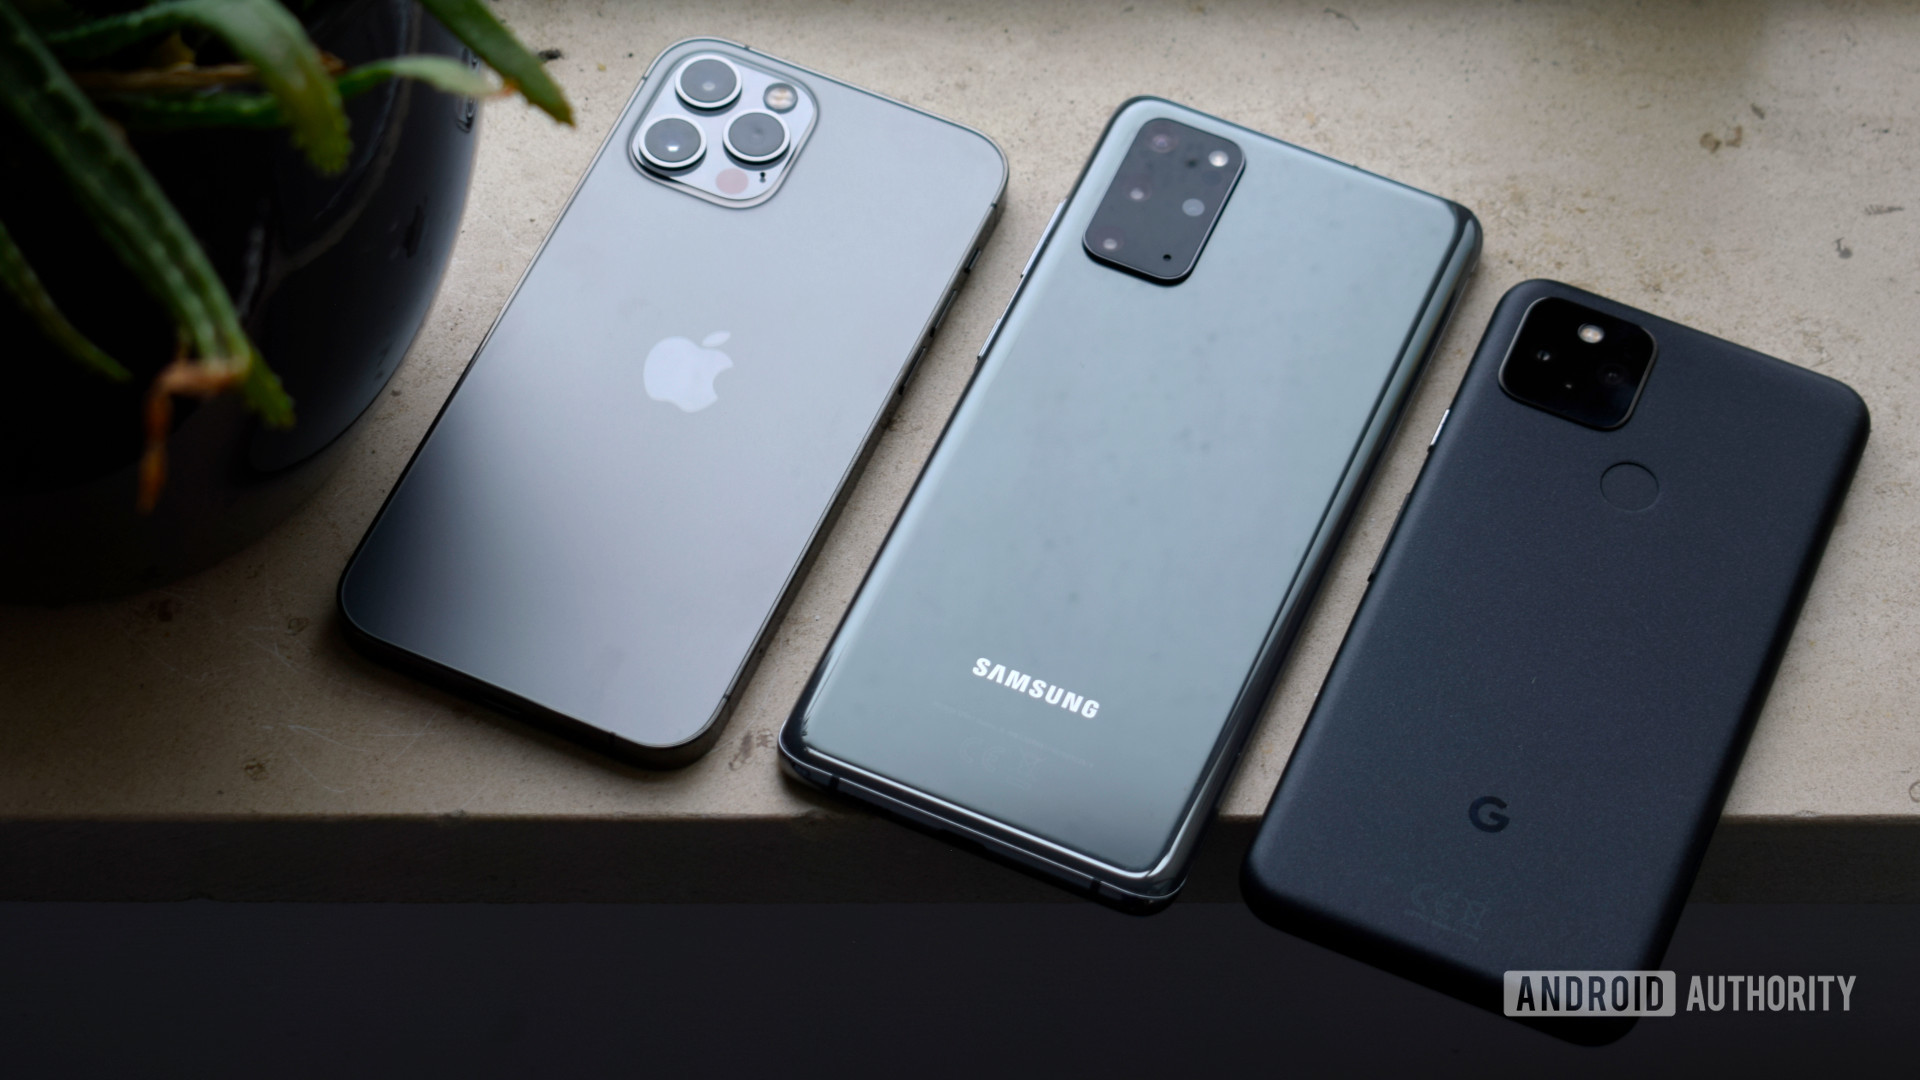 Some of the most influential phones: Rear views of the Samsung Galaxy S20 Plus vs Apple iPhone 12 Pro vs Google Pixel 5.